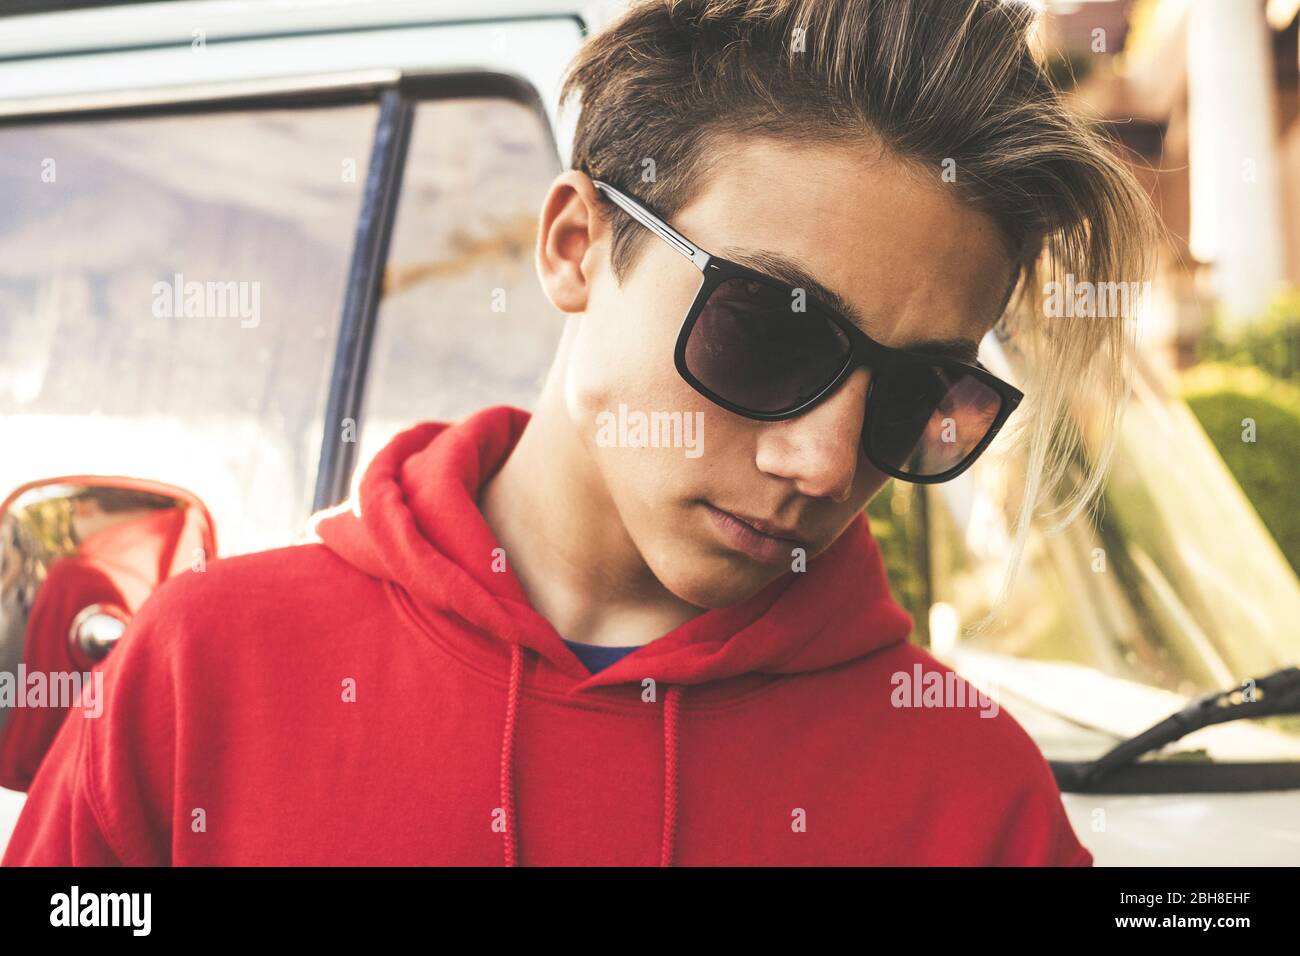 beautiful boy model young age pose outdoor with black sunglasses - trendy millennial kid 15 years old - vintage brown tones colors image fashion concept Stock Photo